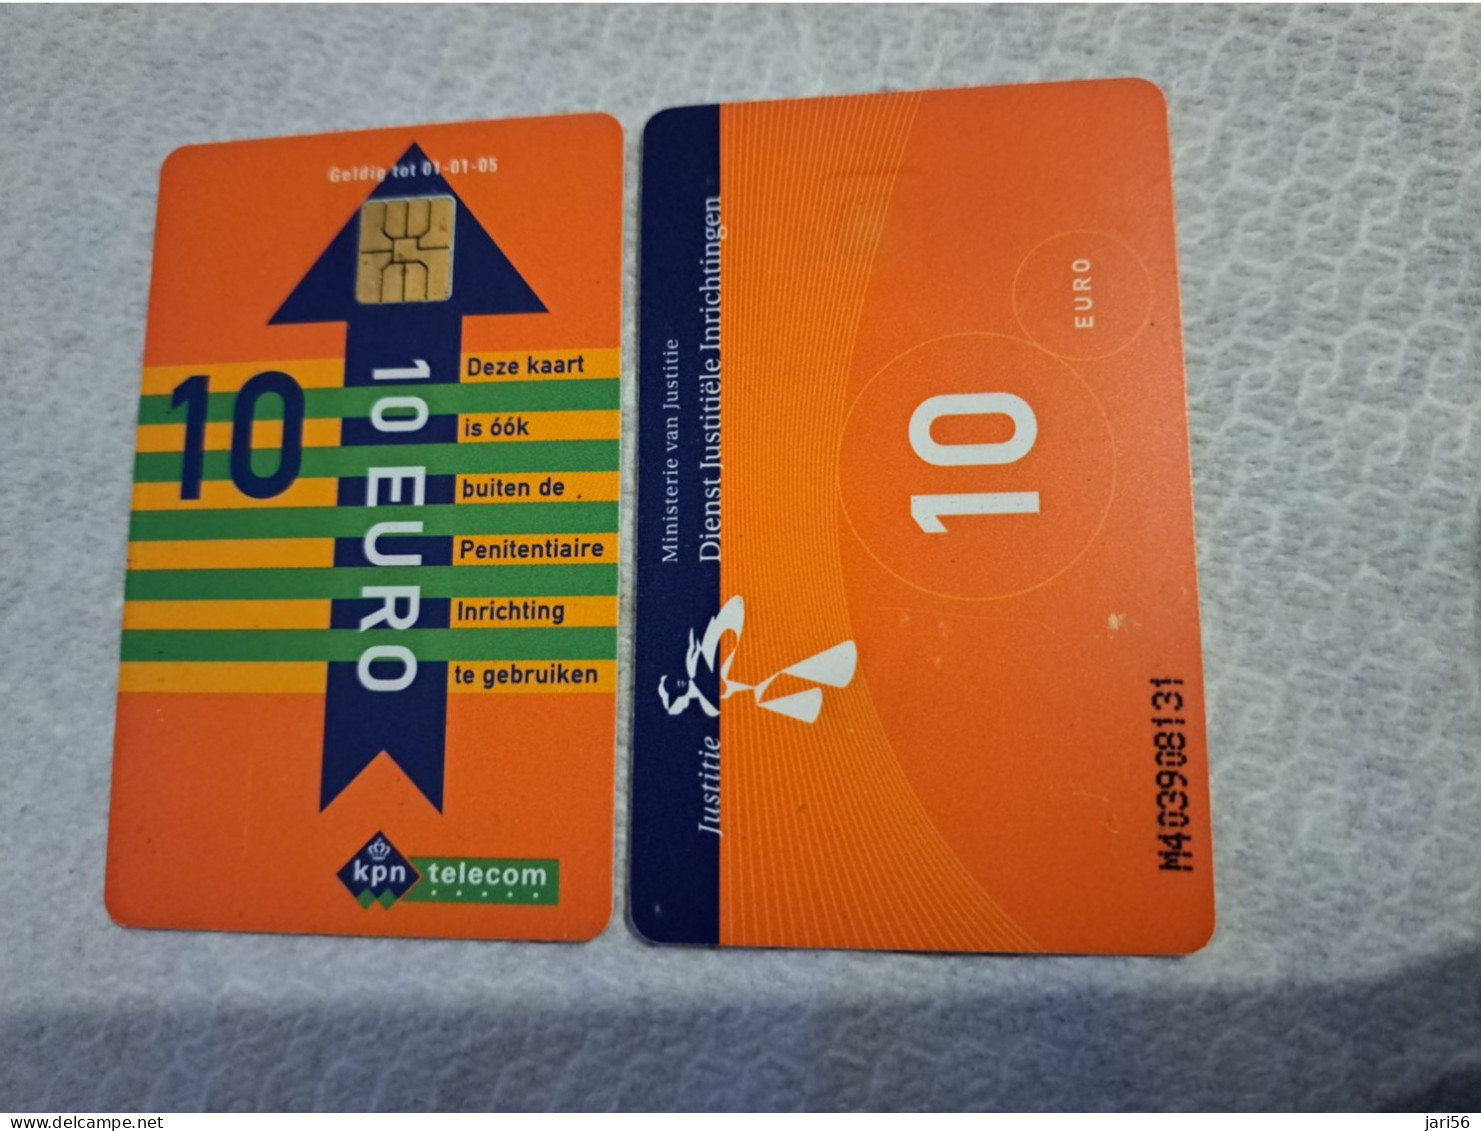 NETHERLANDS   € 10,-   / USED  / DATE  01-01-05  JUSTITIE/PRISON CARD  CHIP CARD/ USED   ** 16160** - Schede GSM, Prepagate E Ricariche